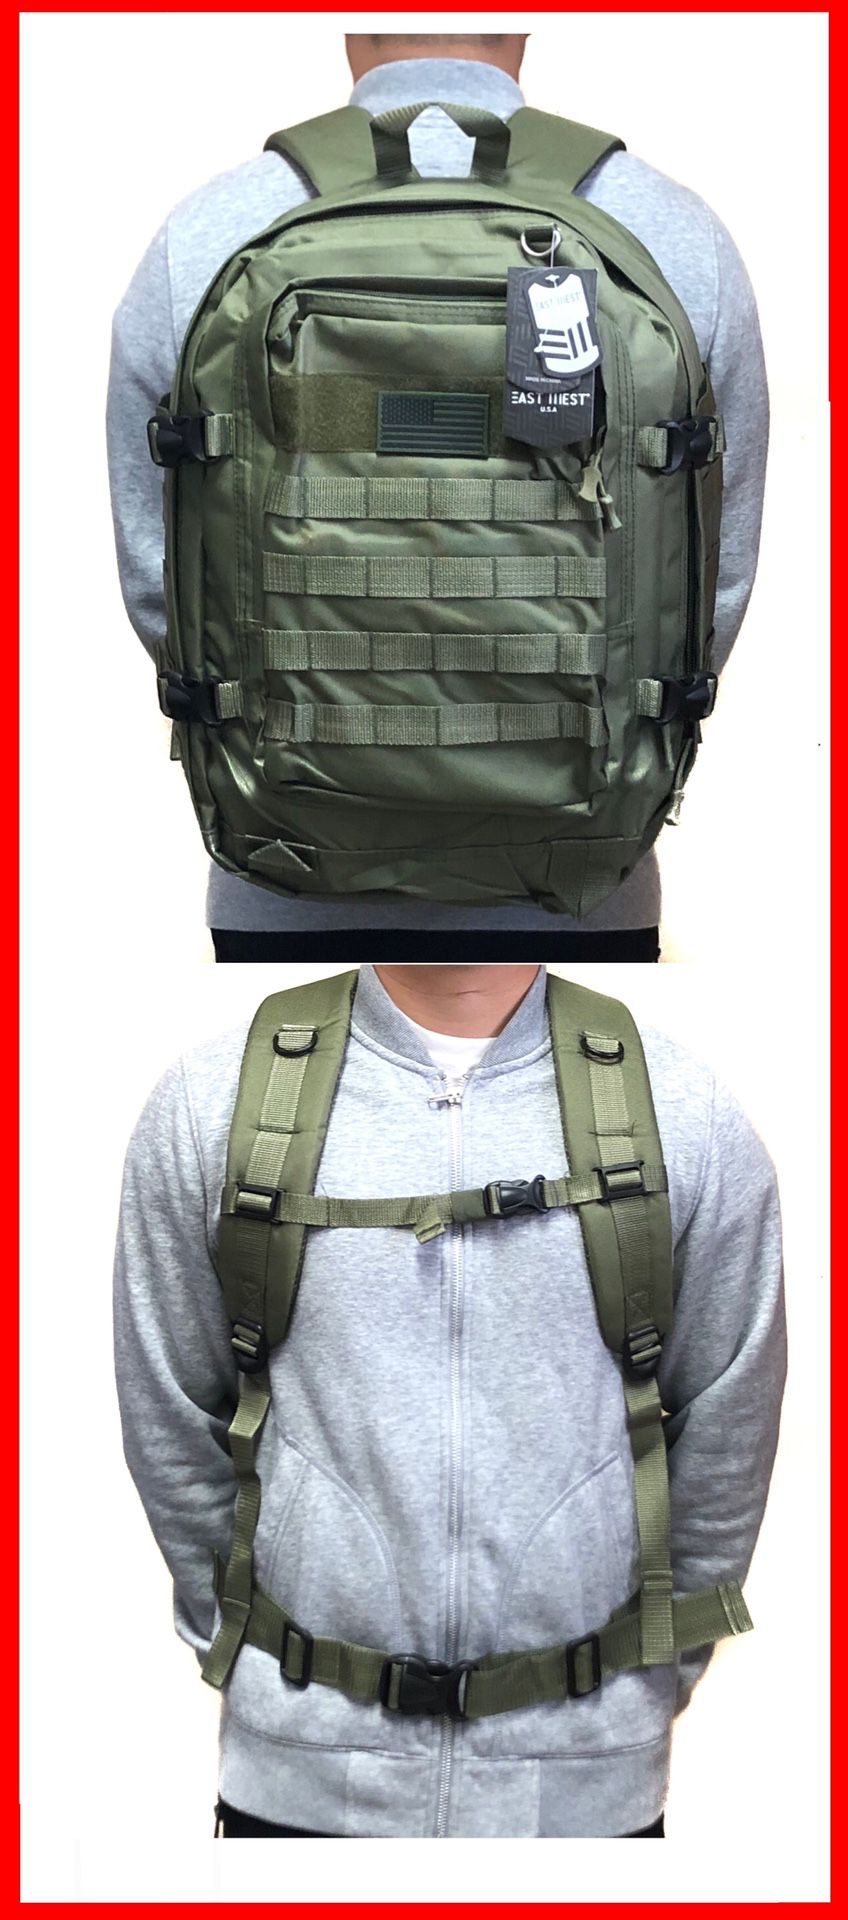 NEW! Tactical military style BACKPACK molle camping fishing hiking school bag work travel luggage bag gym bag